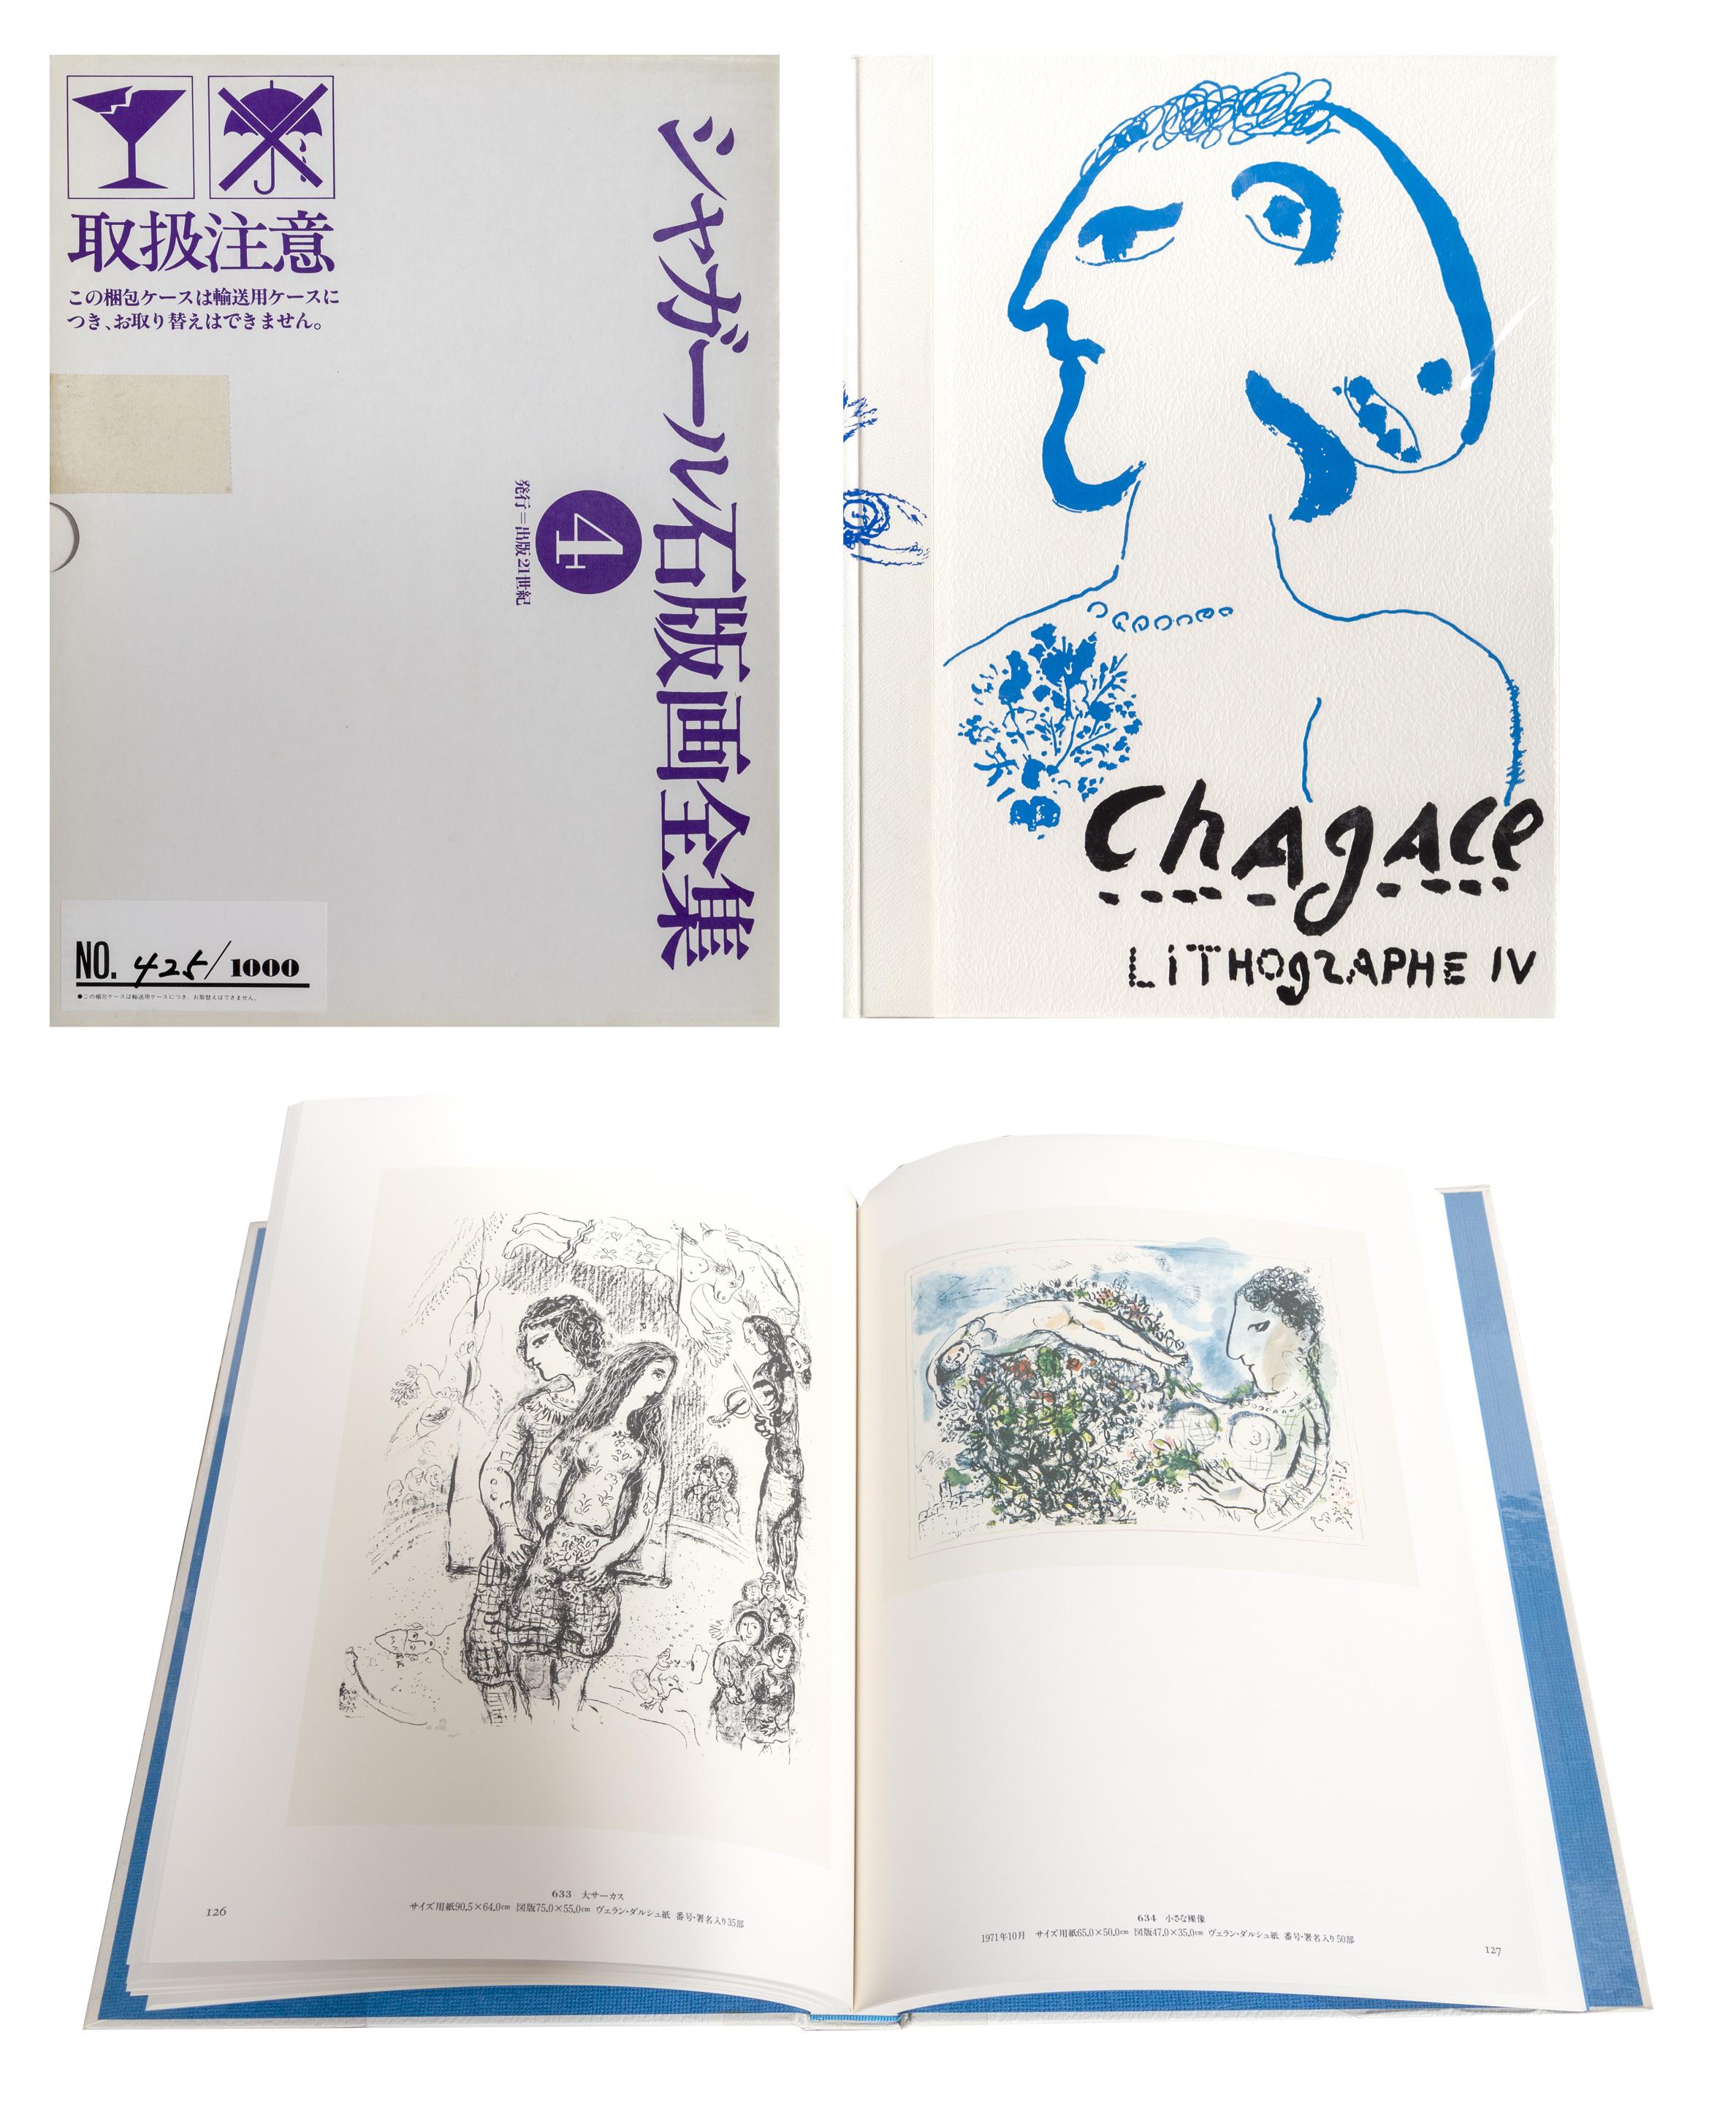 Marc Chagall, Lithographe Volumes I, II, III IV, & Les Affiches de Chagall For Sale 1